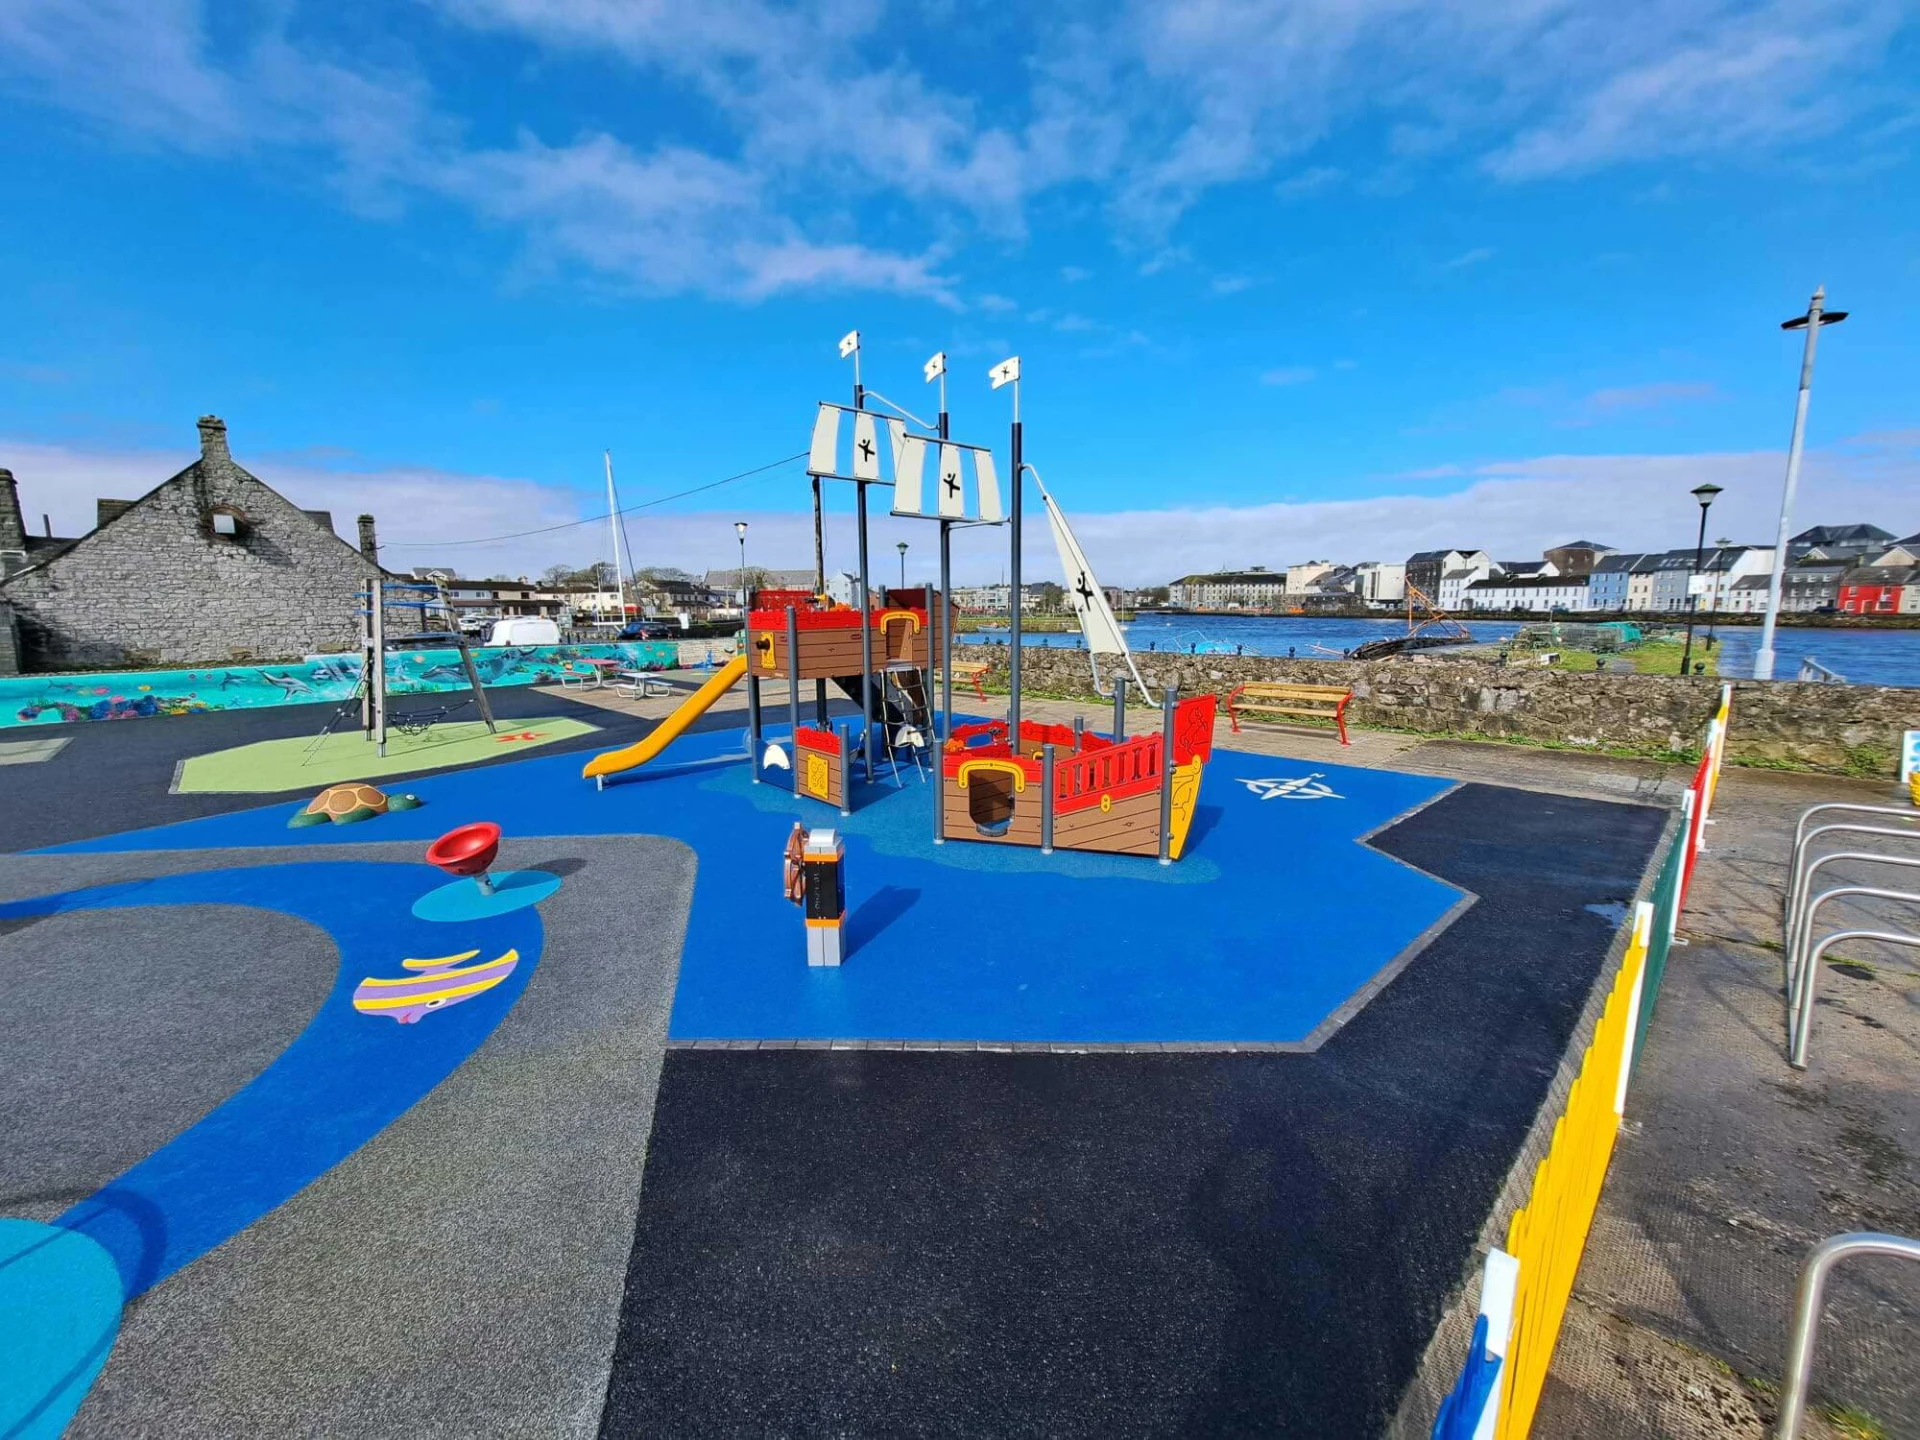 South Park Playground, Claddagh Galway - Image 3